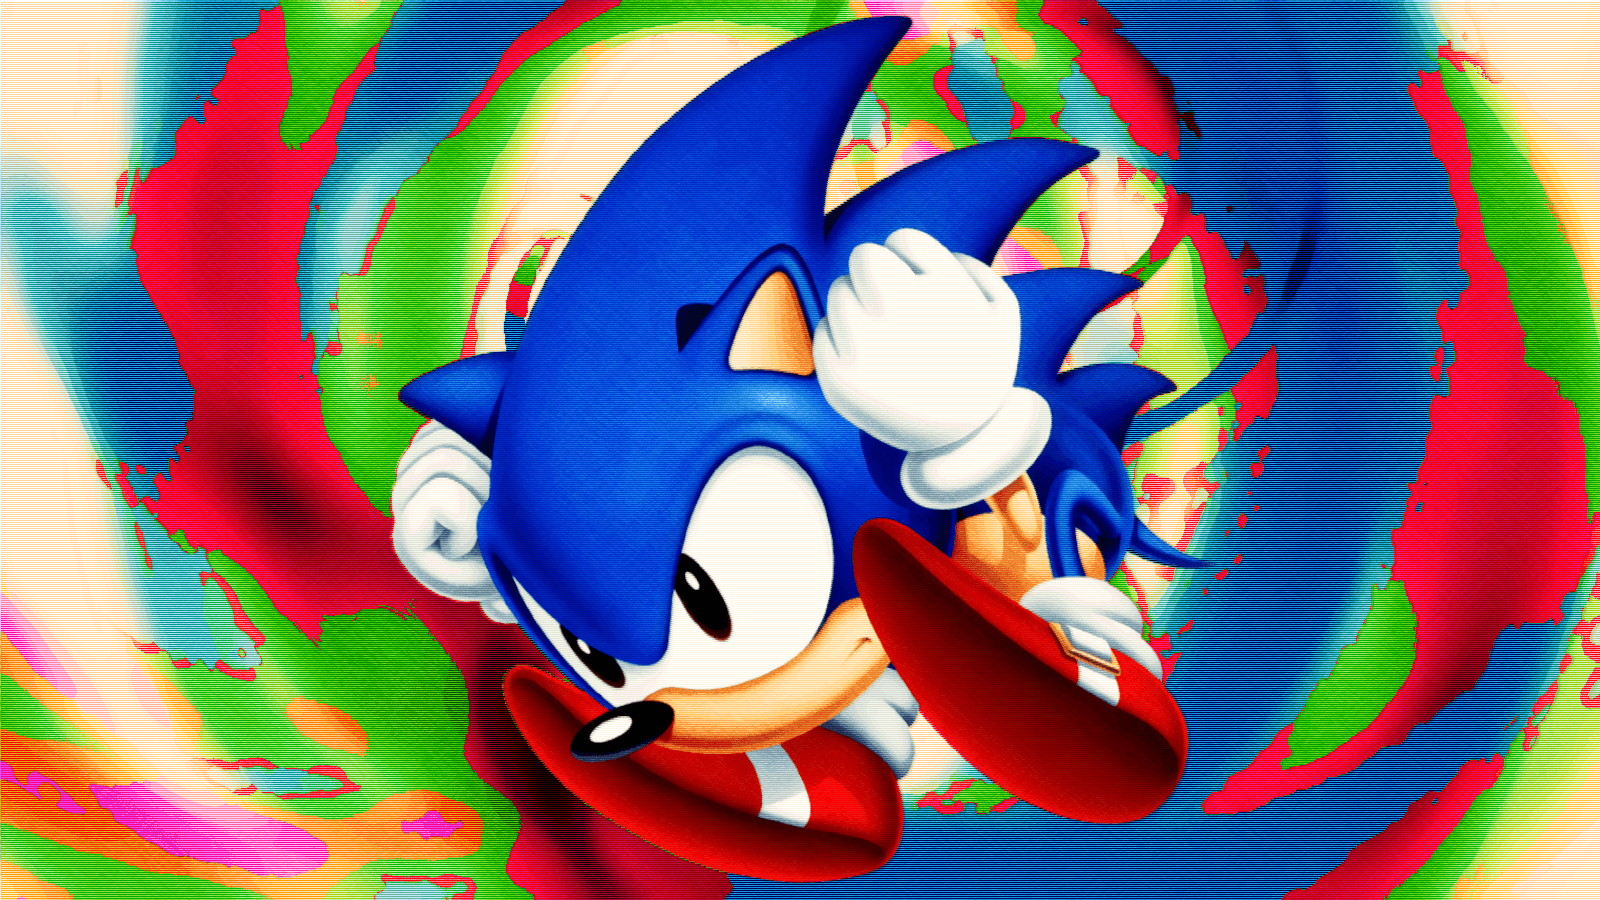 Classic Sonic The Hedgehog[3] By Light Rock